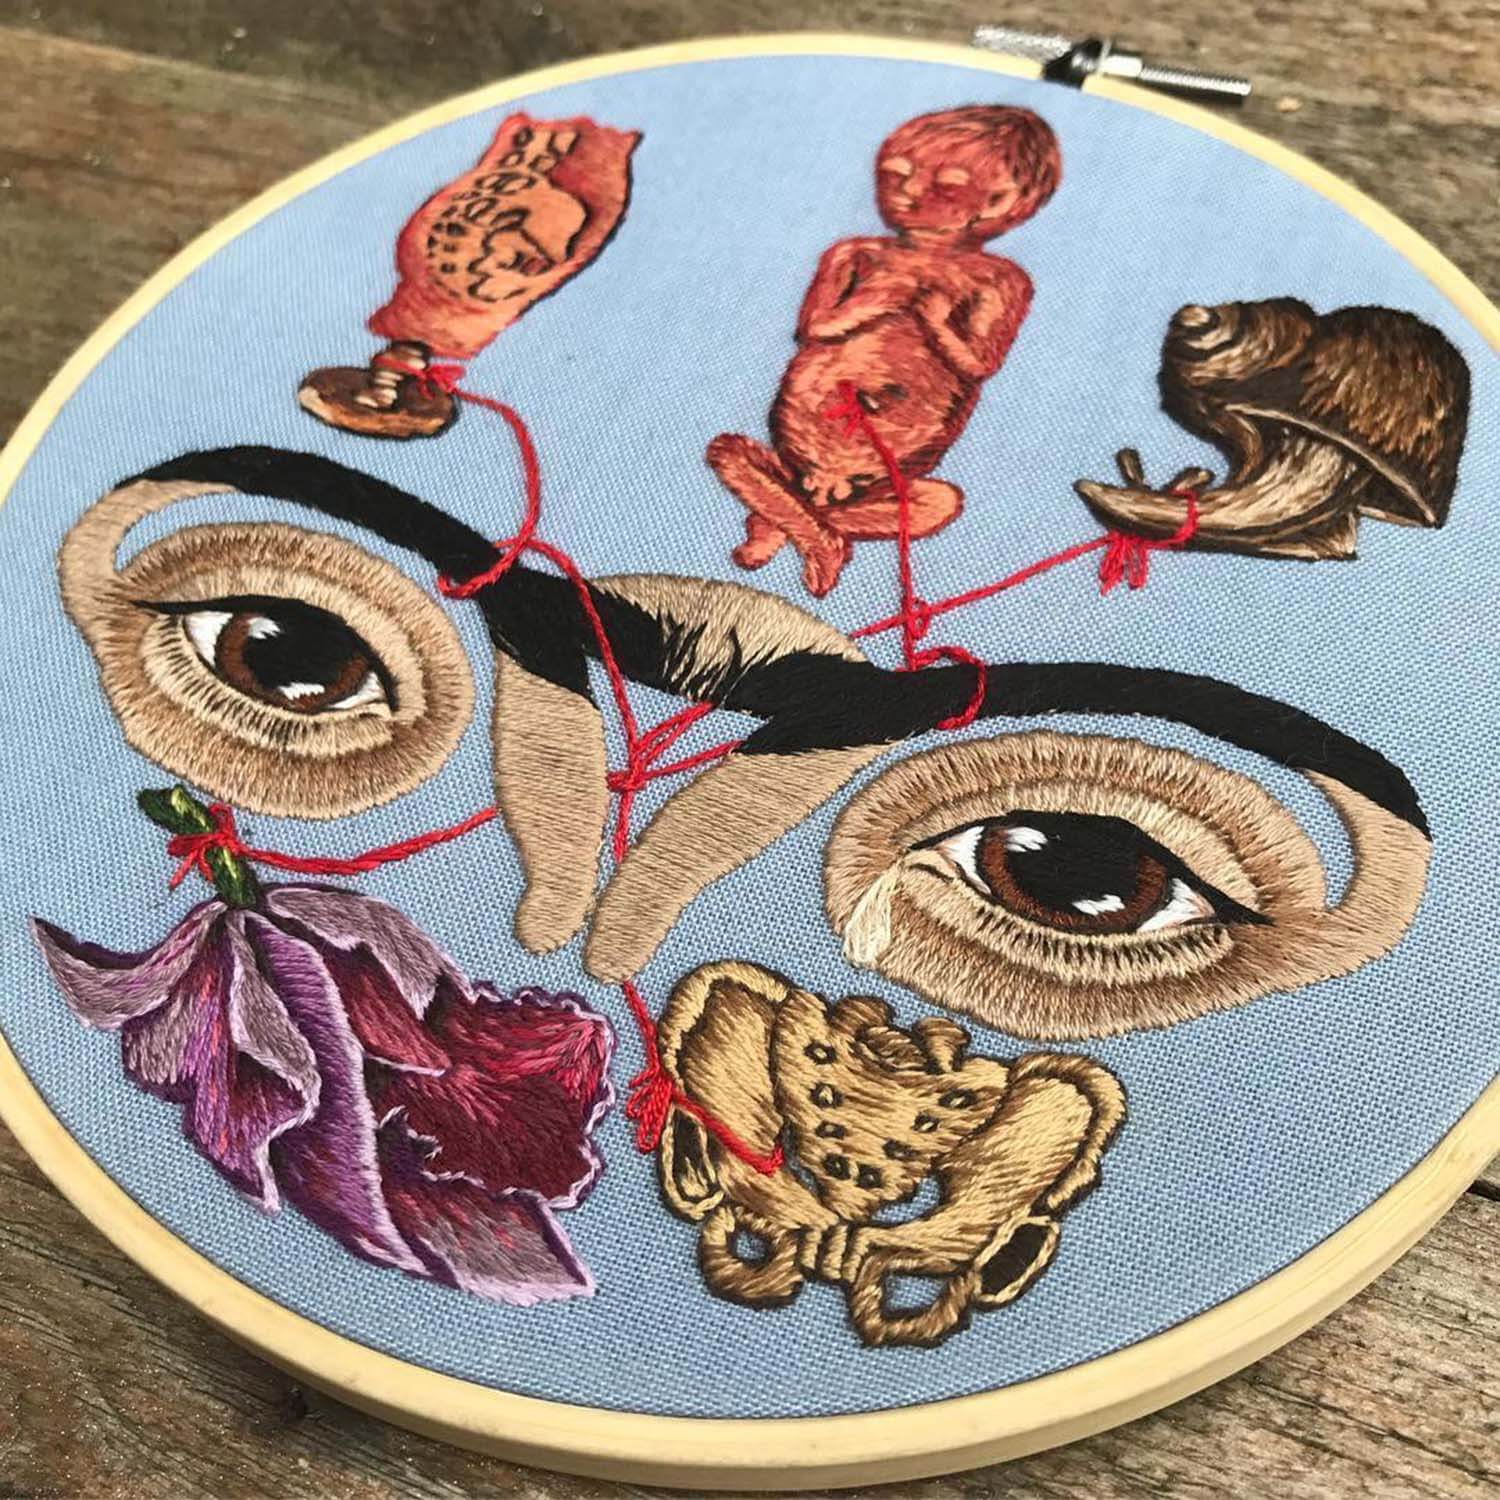 Ovaries embroidery with frida kahlo motif